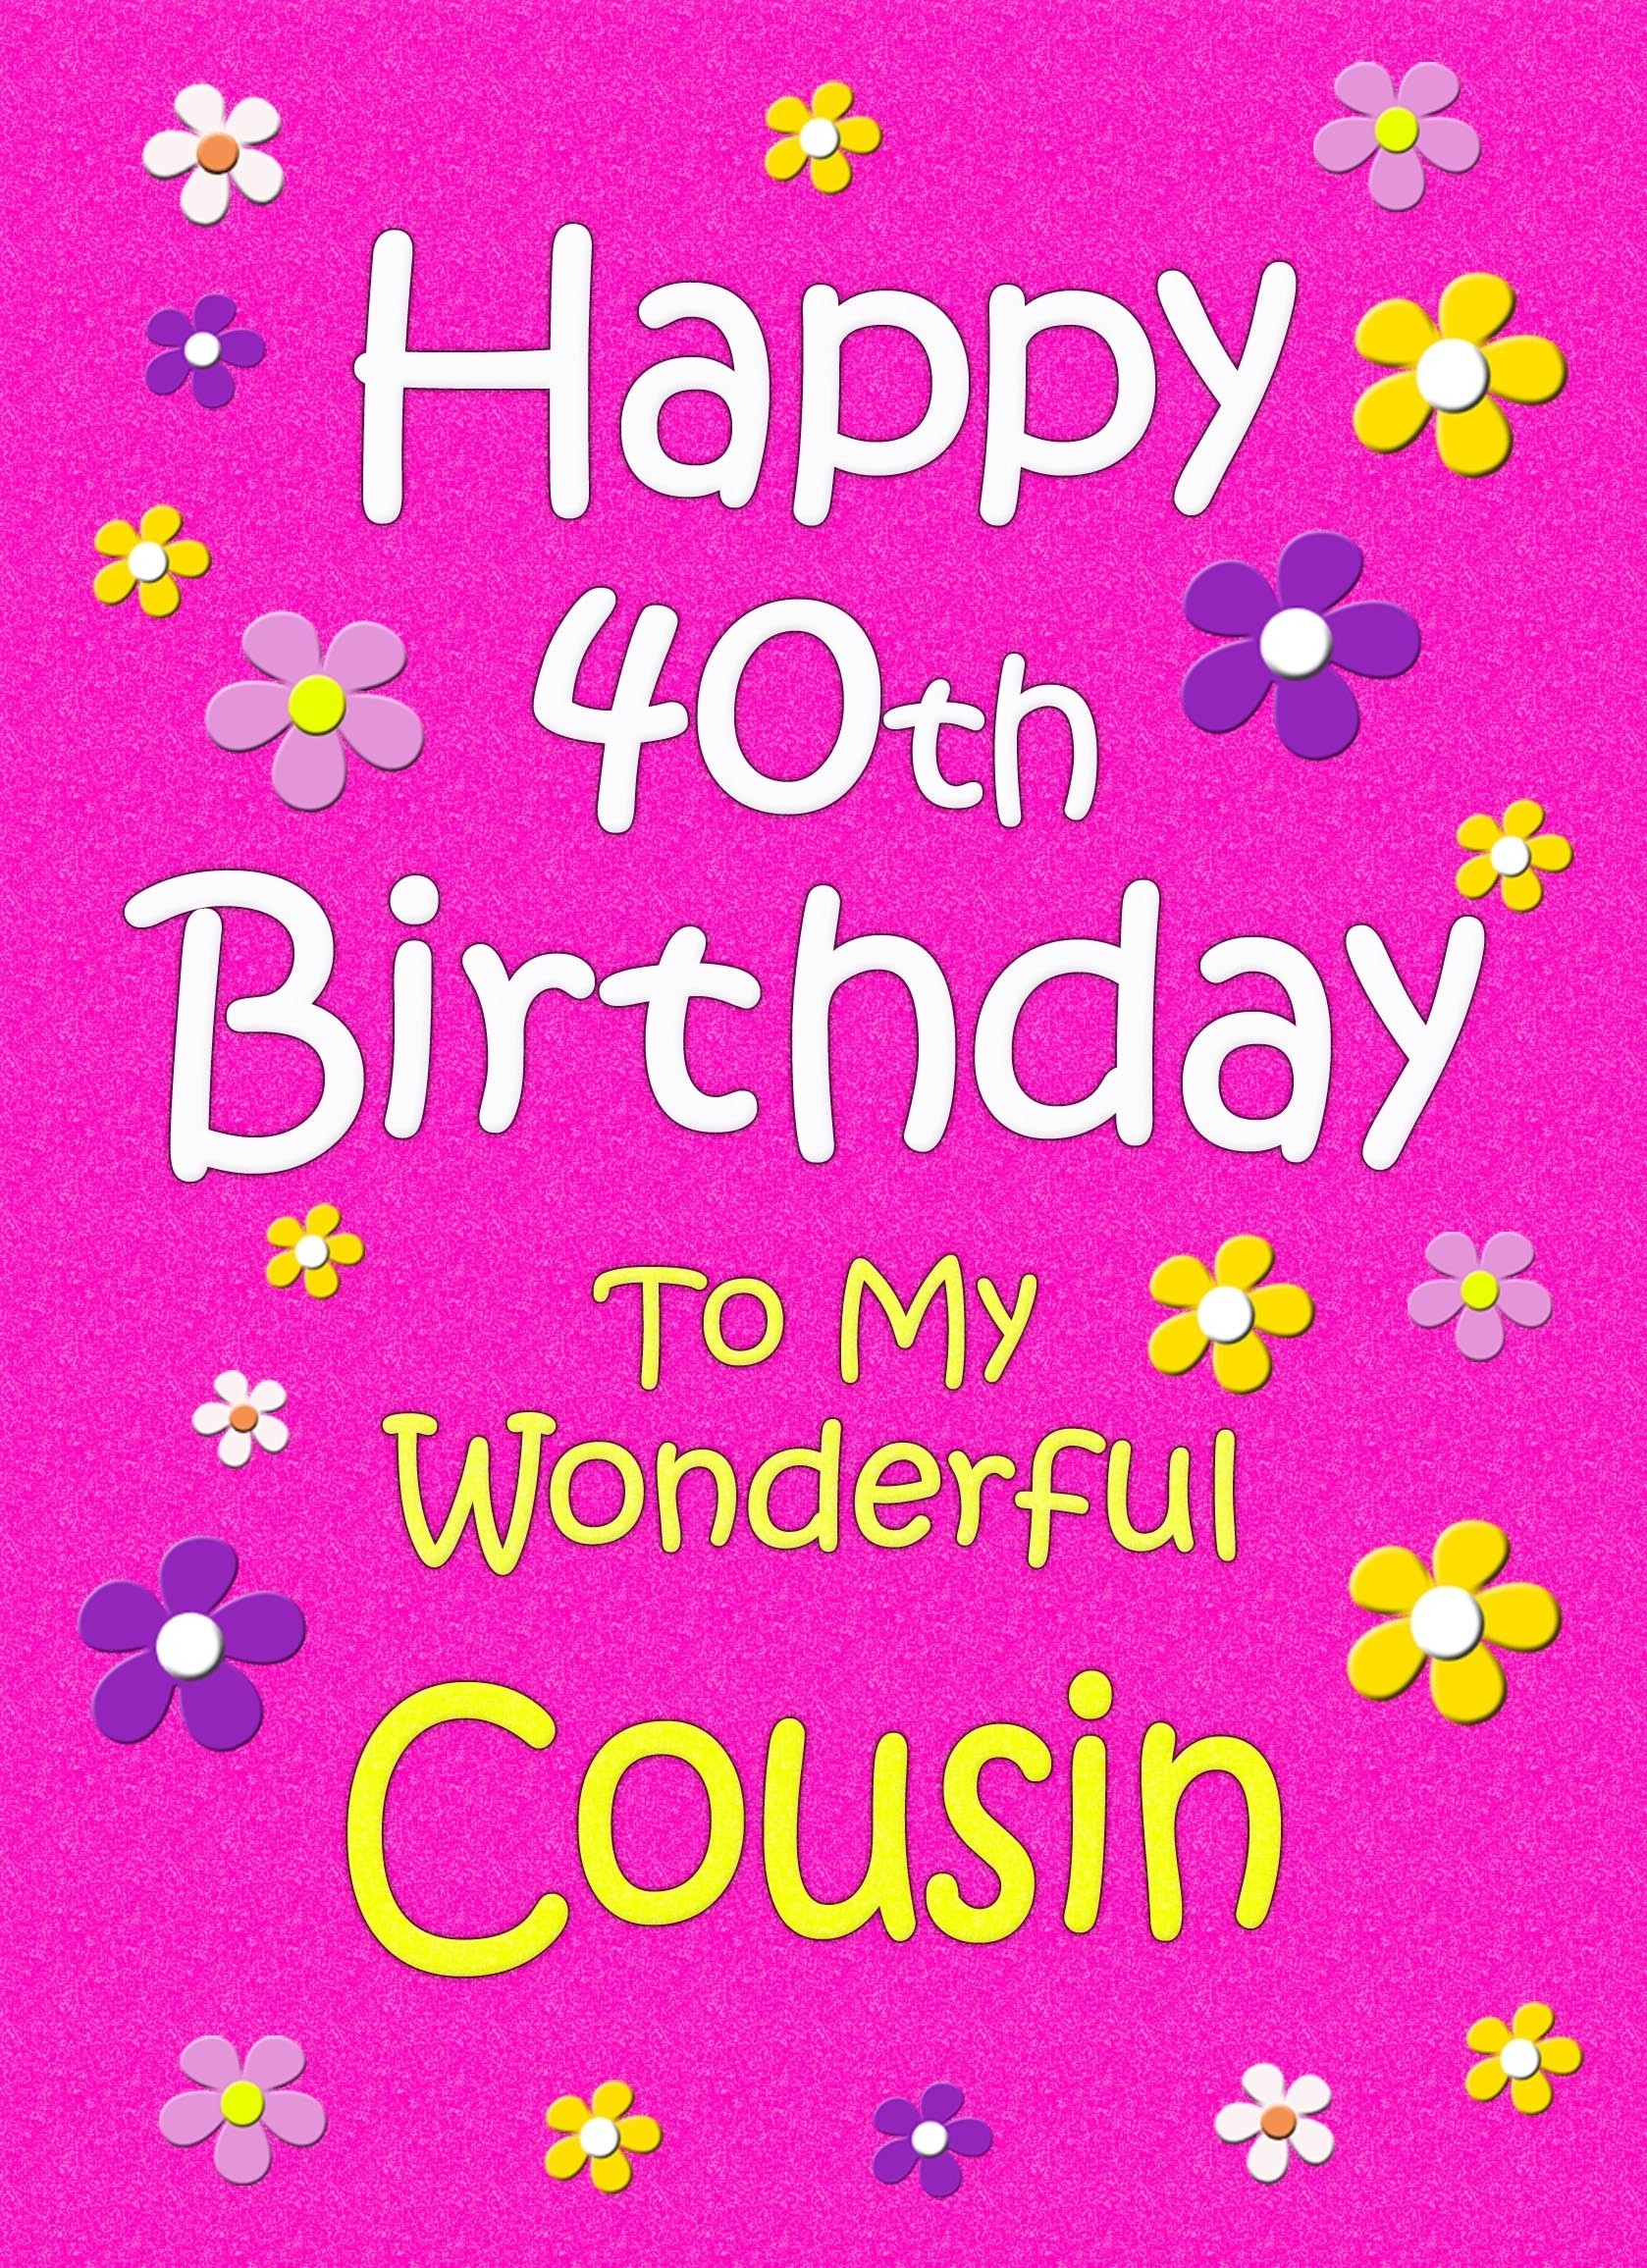 Cousin 40th Birthday Card (Pink)